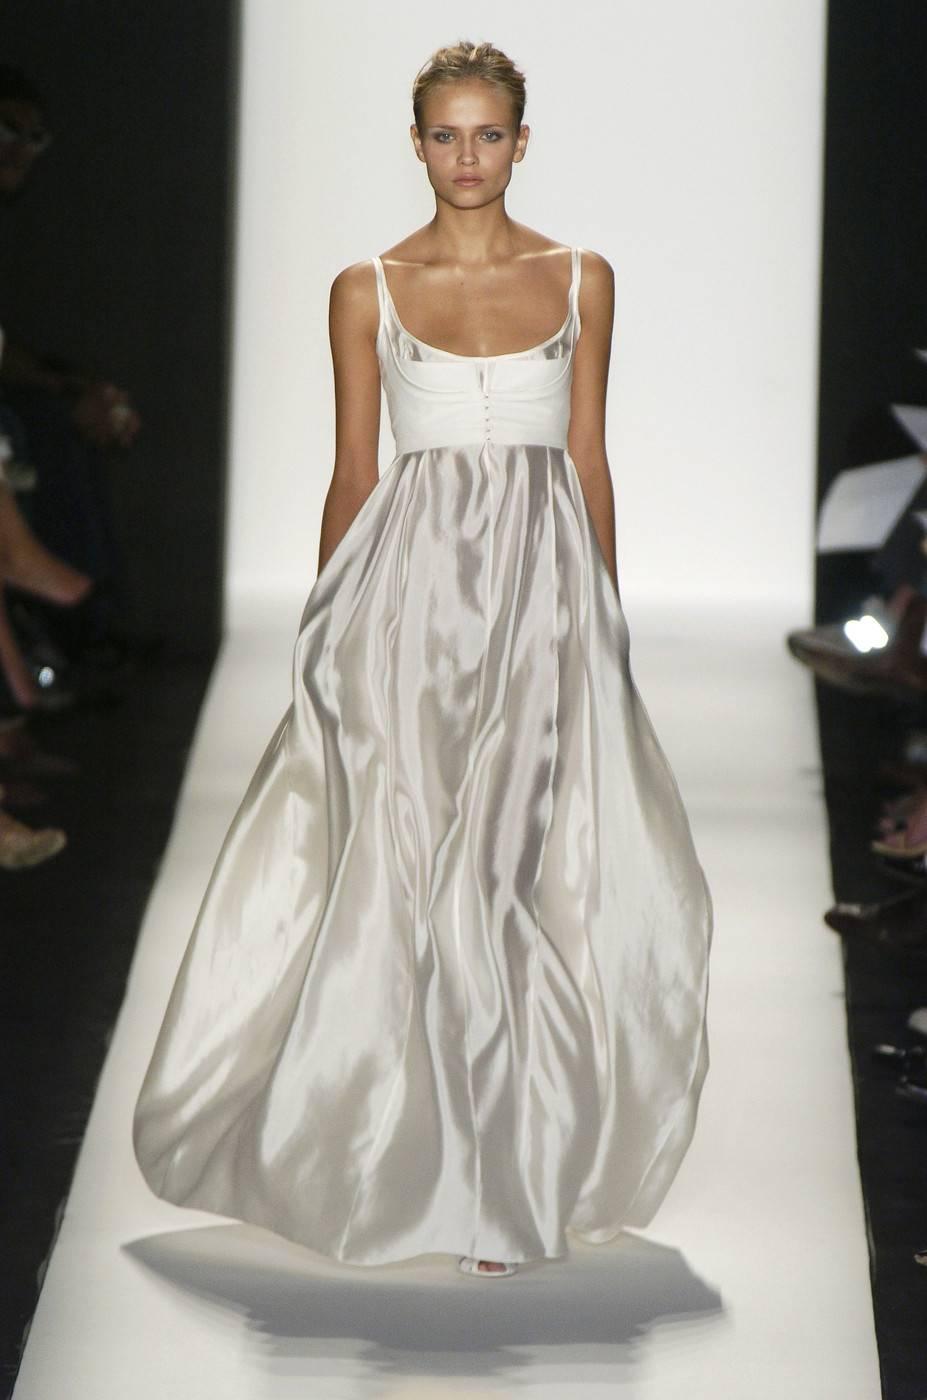  Narciso Rodriguez spring 2005  off white silk gown with bra top. (2 pcs)
Measurement for Bra:  32